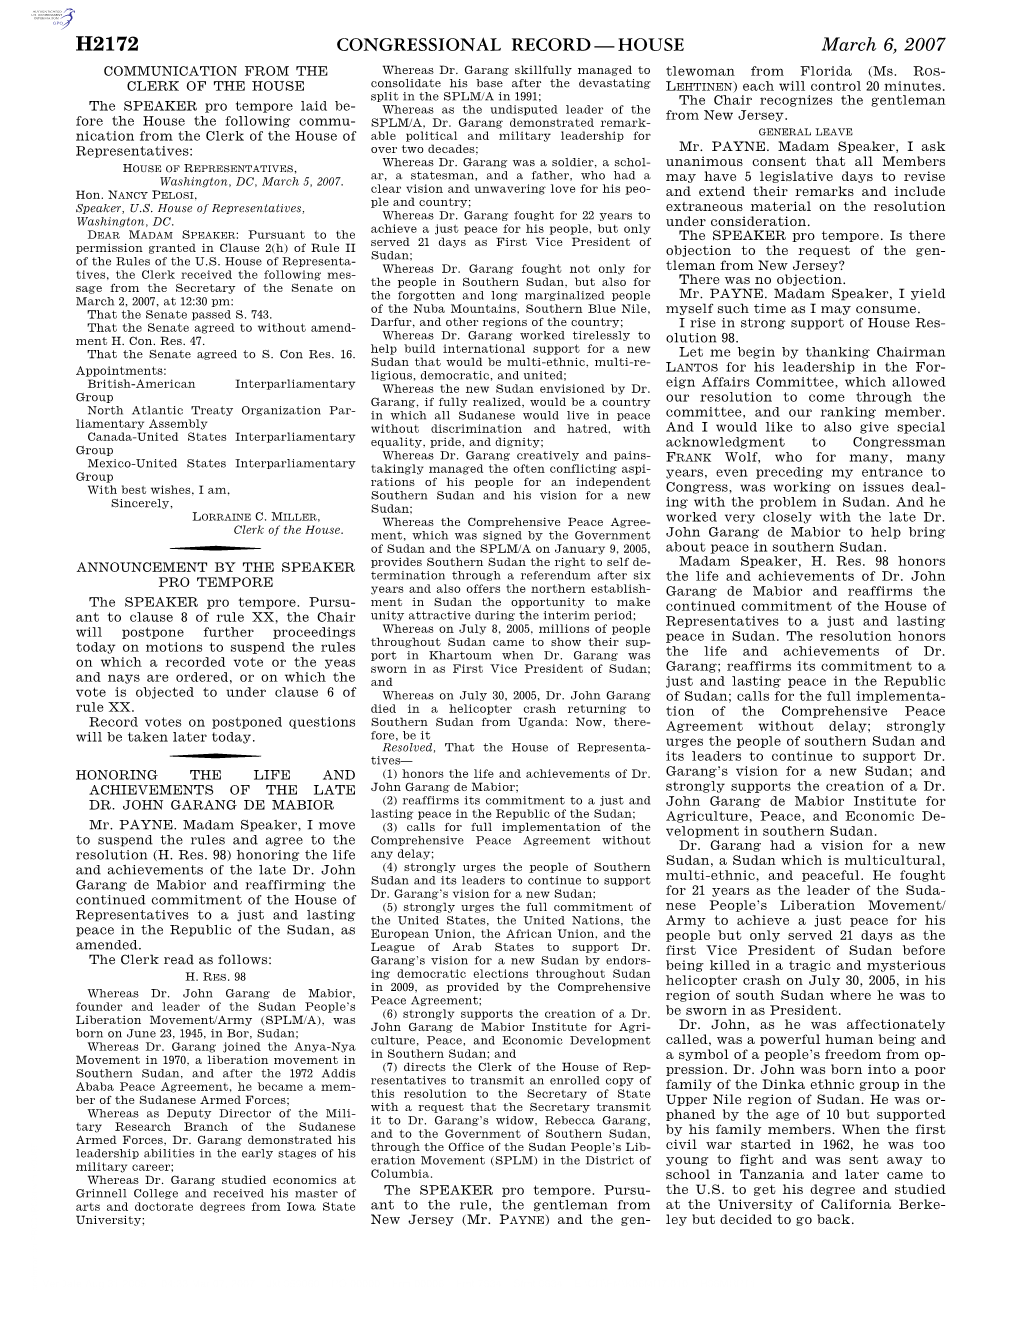 Congressional Record—House H2172